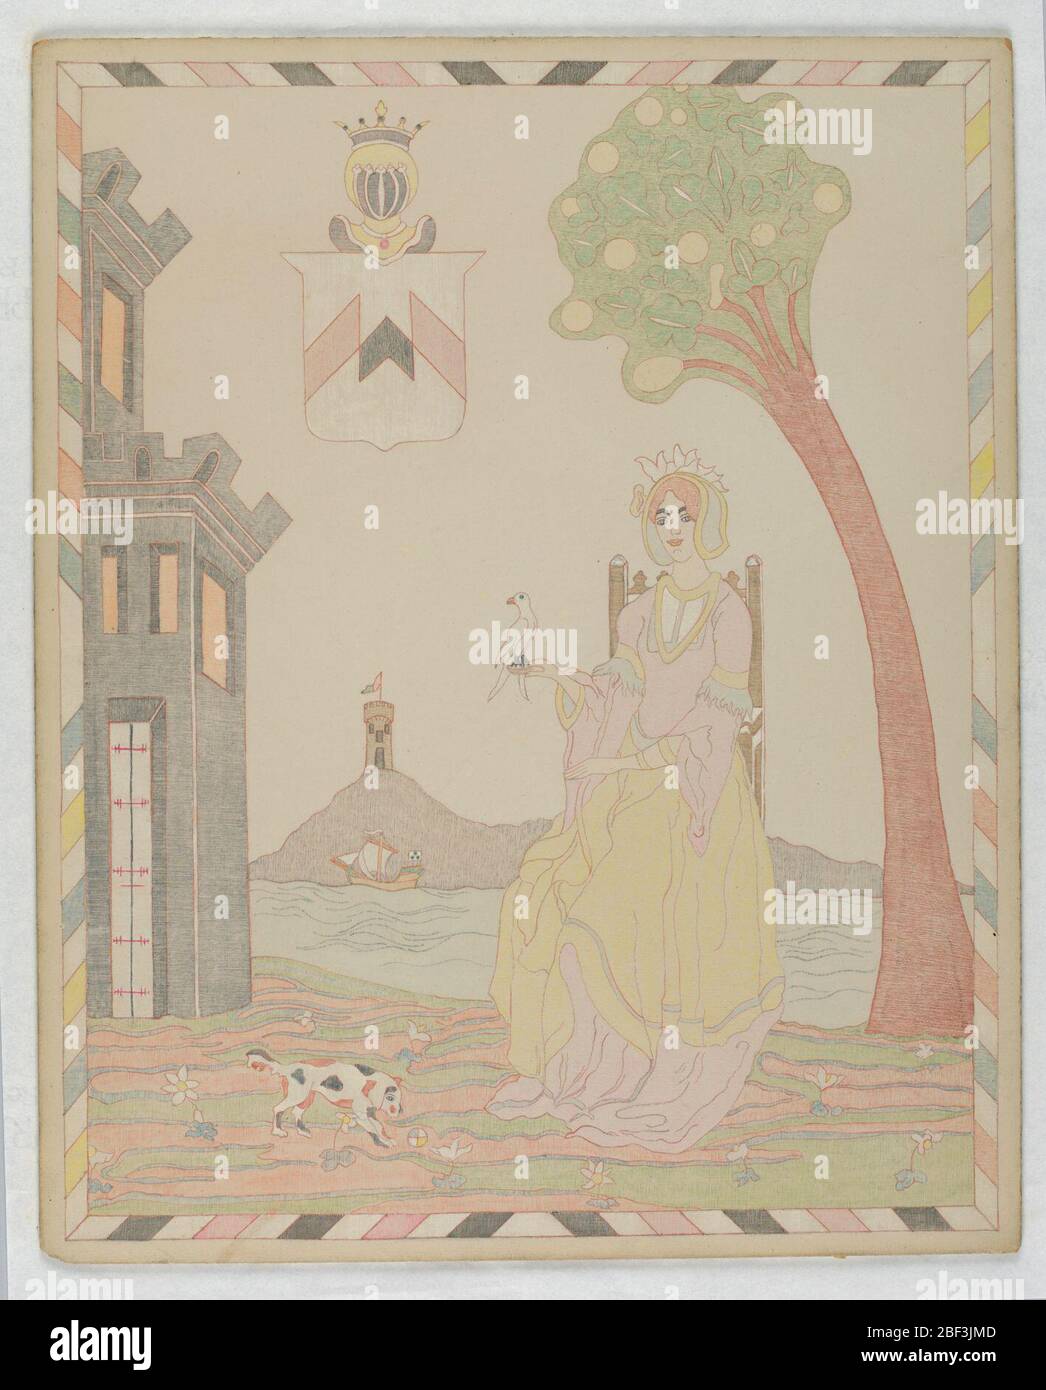 Woman Seated on Chair. Woman seated on a chair under a tree, right, with a bird on her hand; left, a dog, and a wall. Beyond, a lake with a boat, then a tower on a mountain. Shield and mask, upper left. Stock Photo